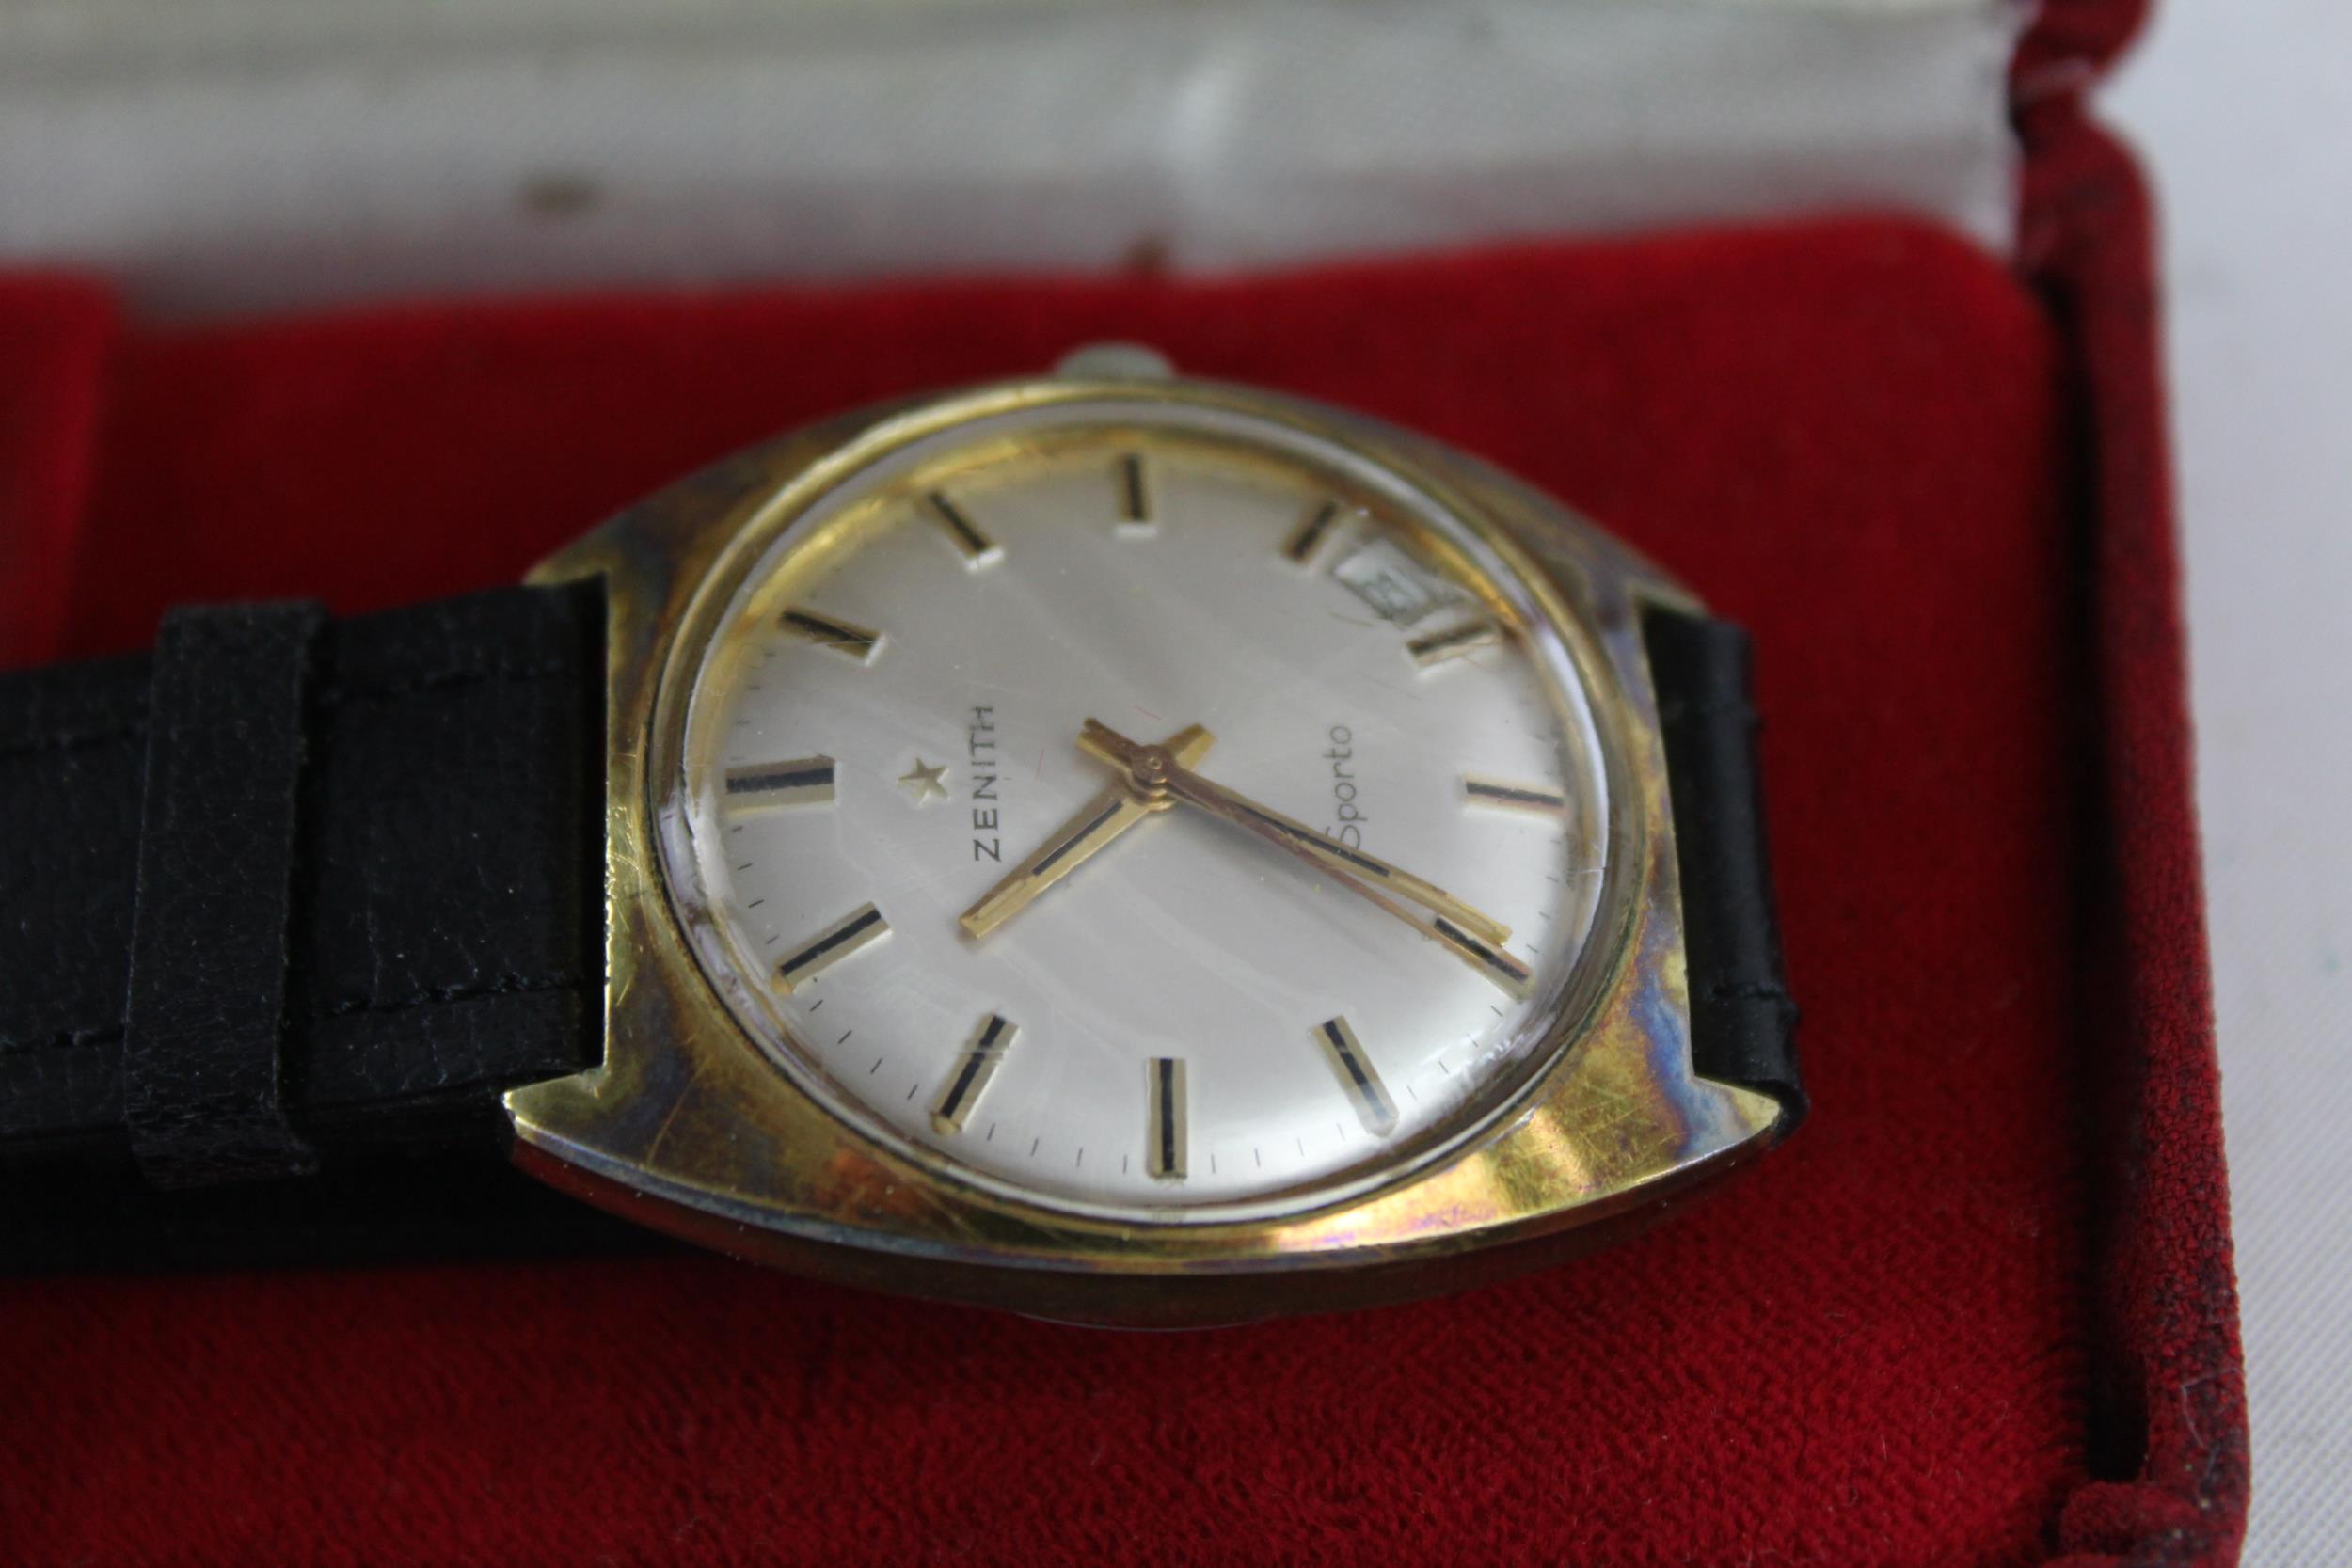 Vintage Gents ZENITH SPORTO Gold Tone WRISTWATCH Hand-Wind WORKING Boxed - Image 2 of 4